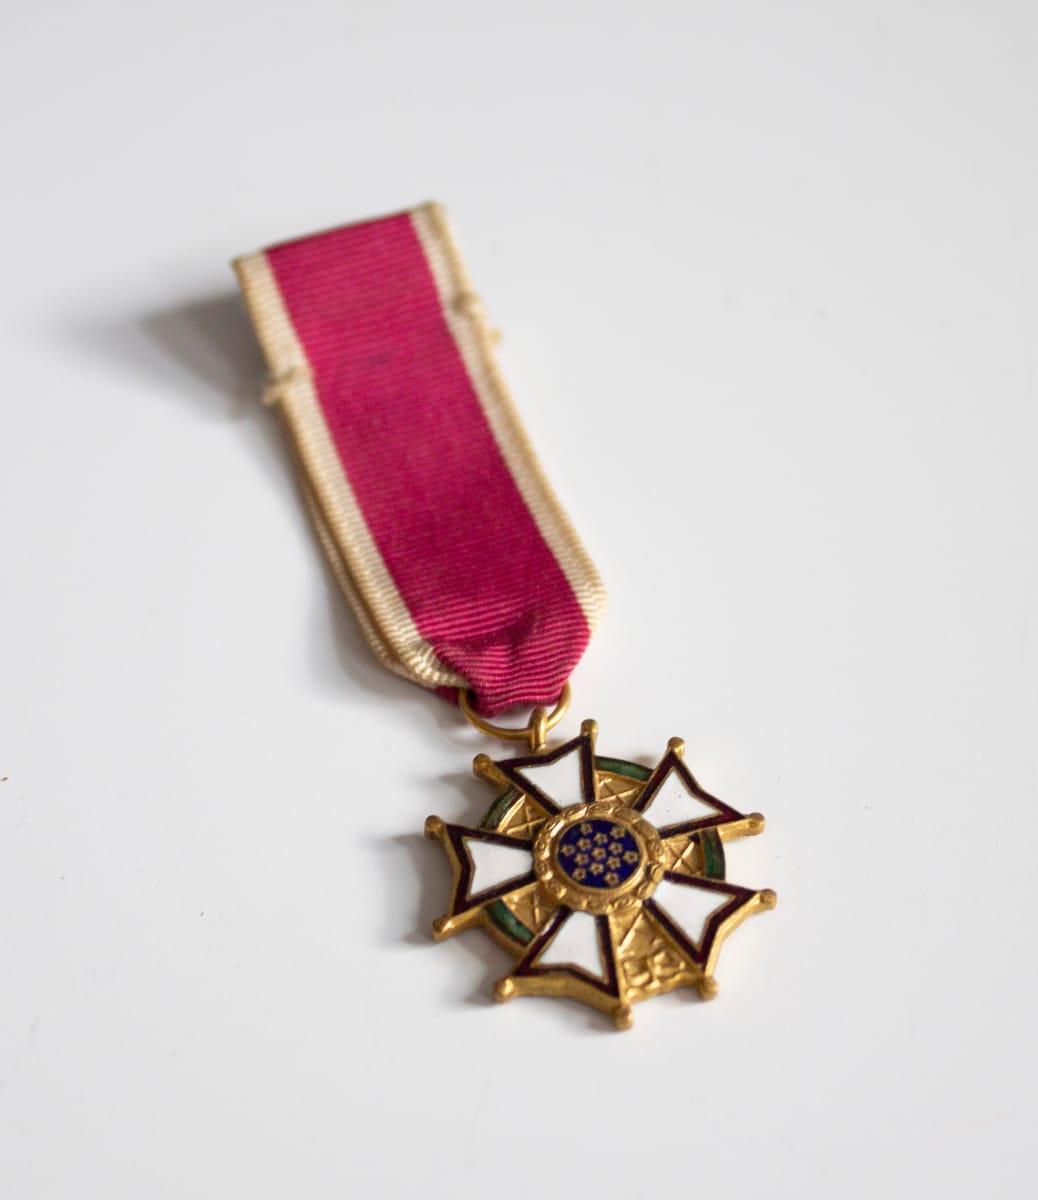 Miniature Legion of Merit Medal by Unknown, United States 